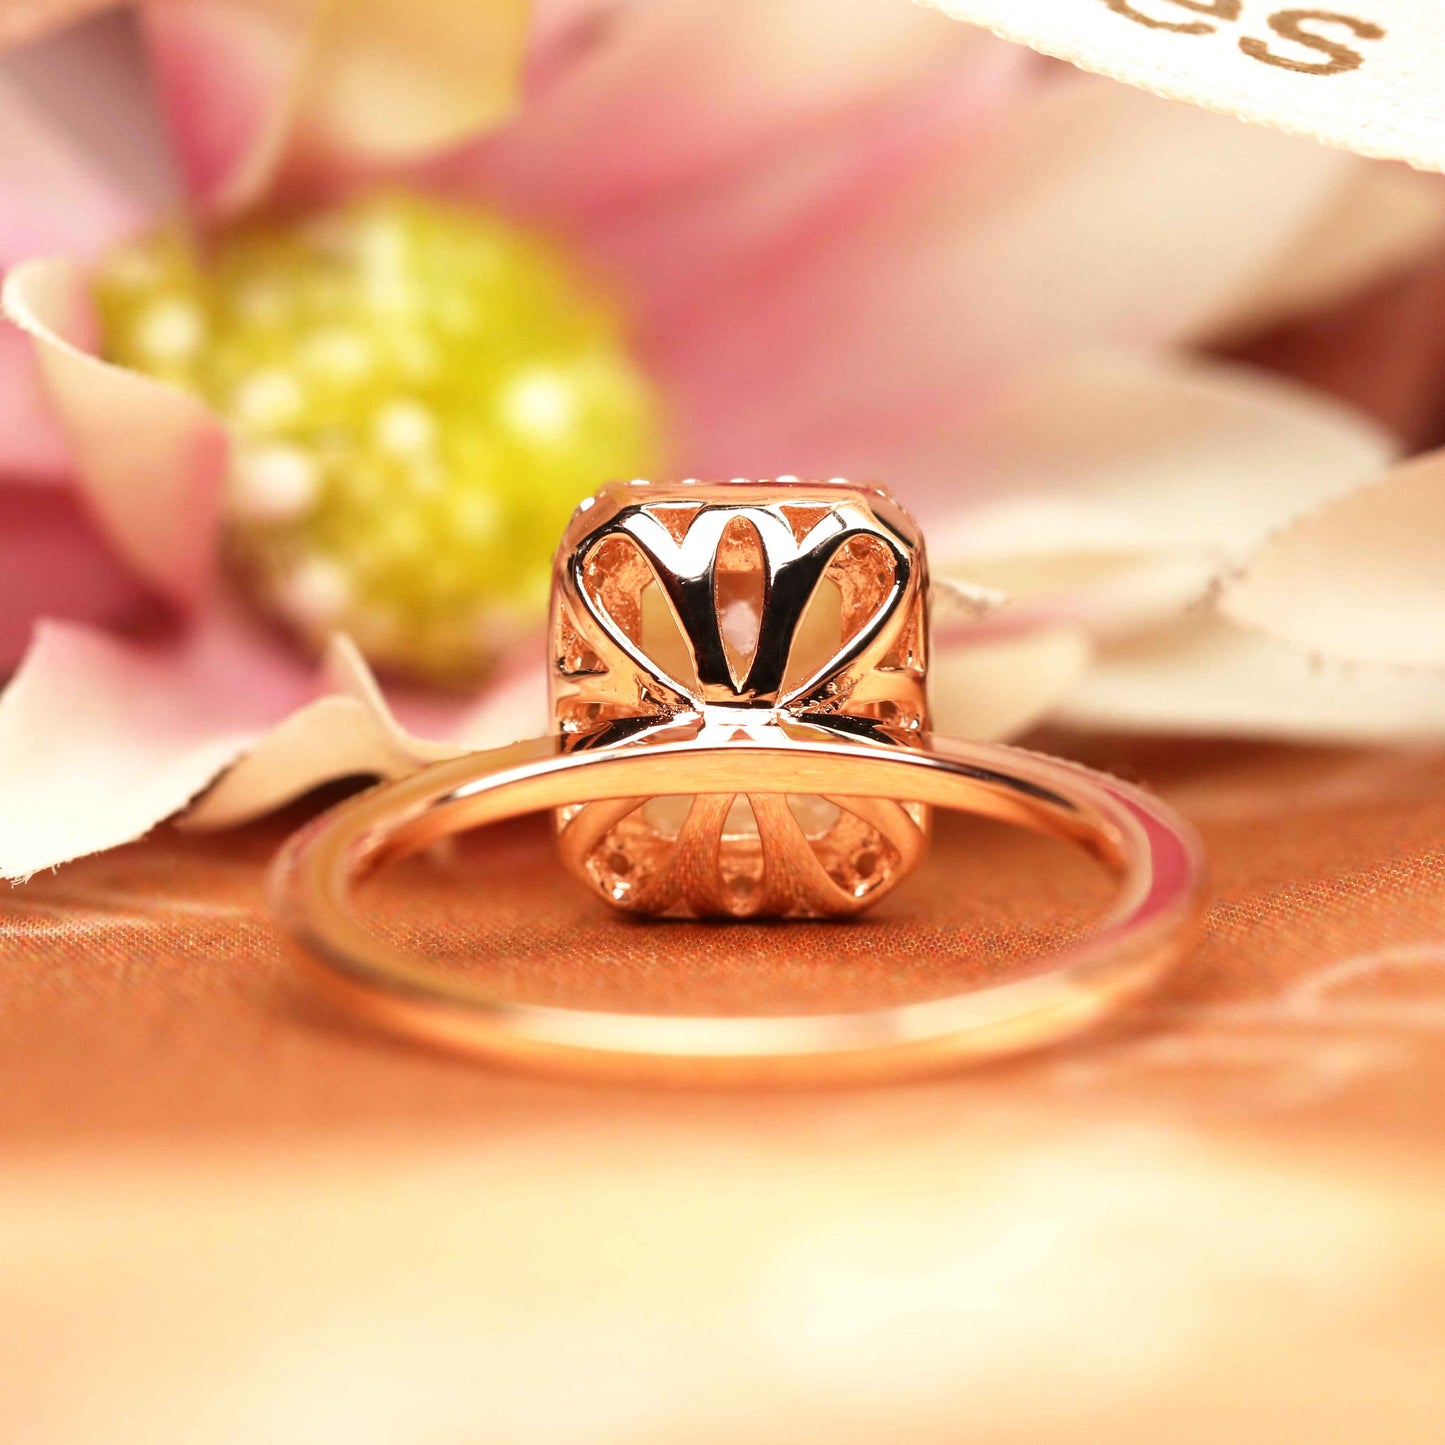 Bestselling 1.5 carat Emerald Cut Peach Pink Morganite Engagement Ring in White Gold